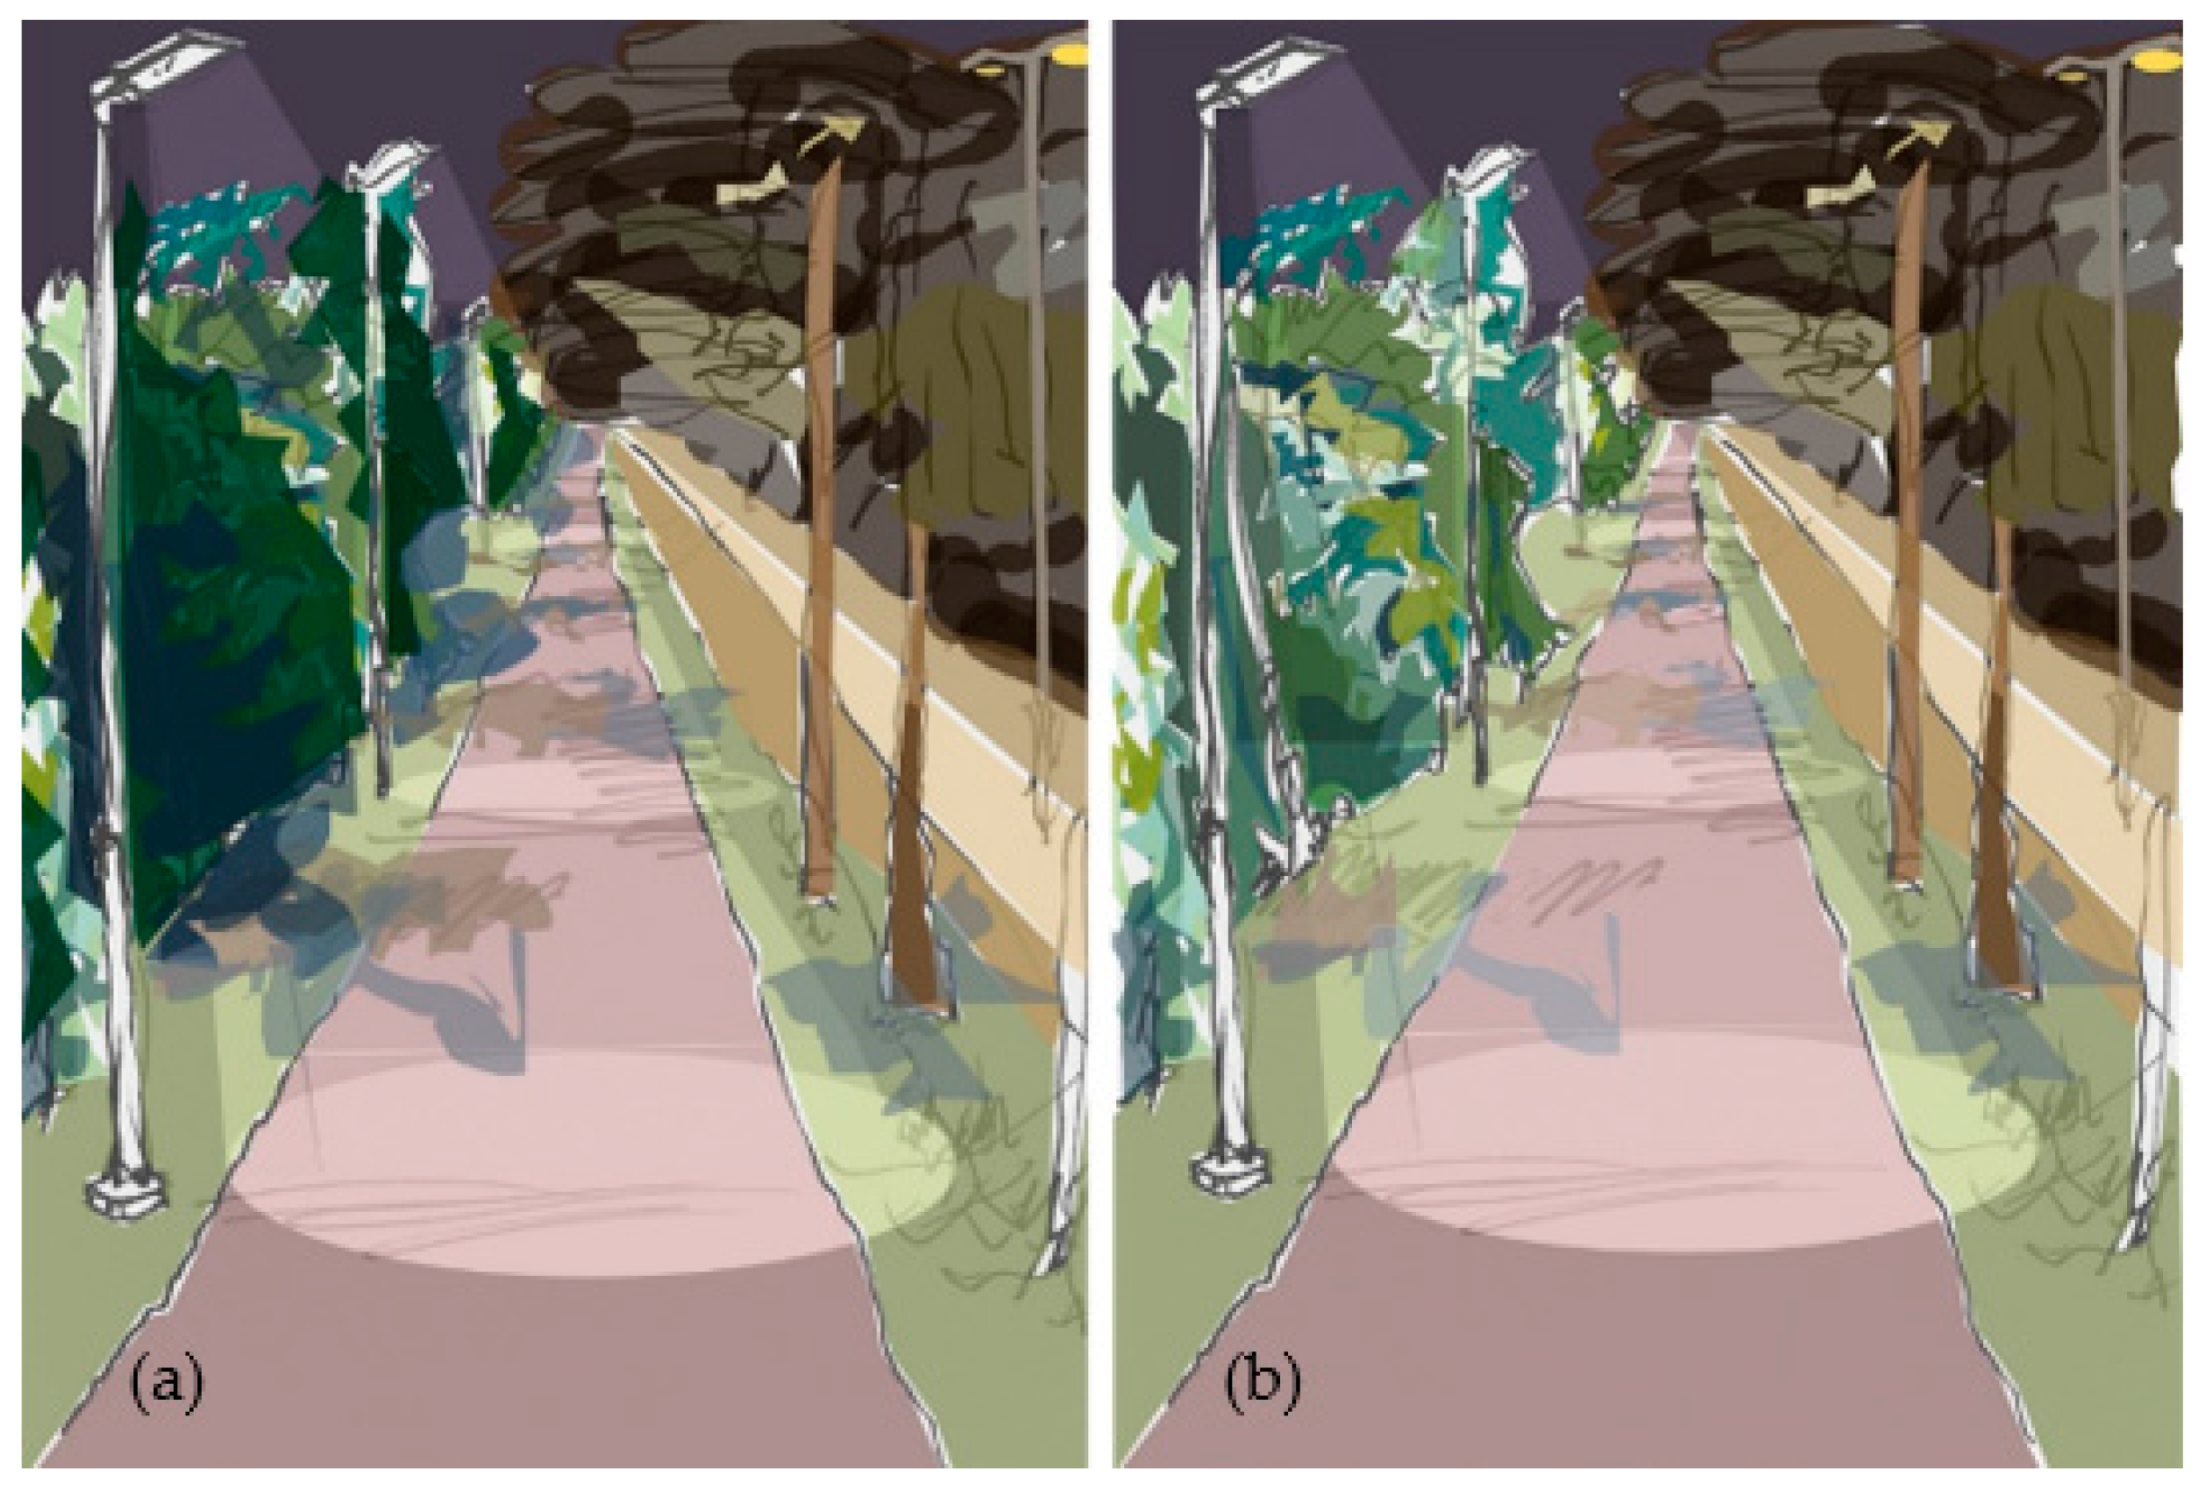 Energies | Free Full-Text | Perceived Lighting Uniformity on Pedestrian  Roads: From an Architectural Perspective